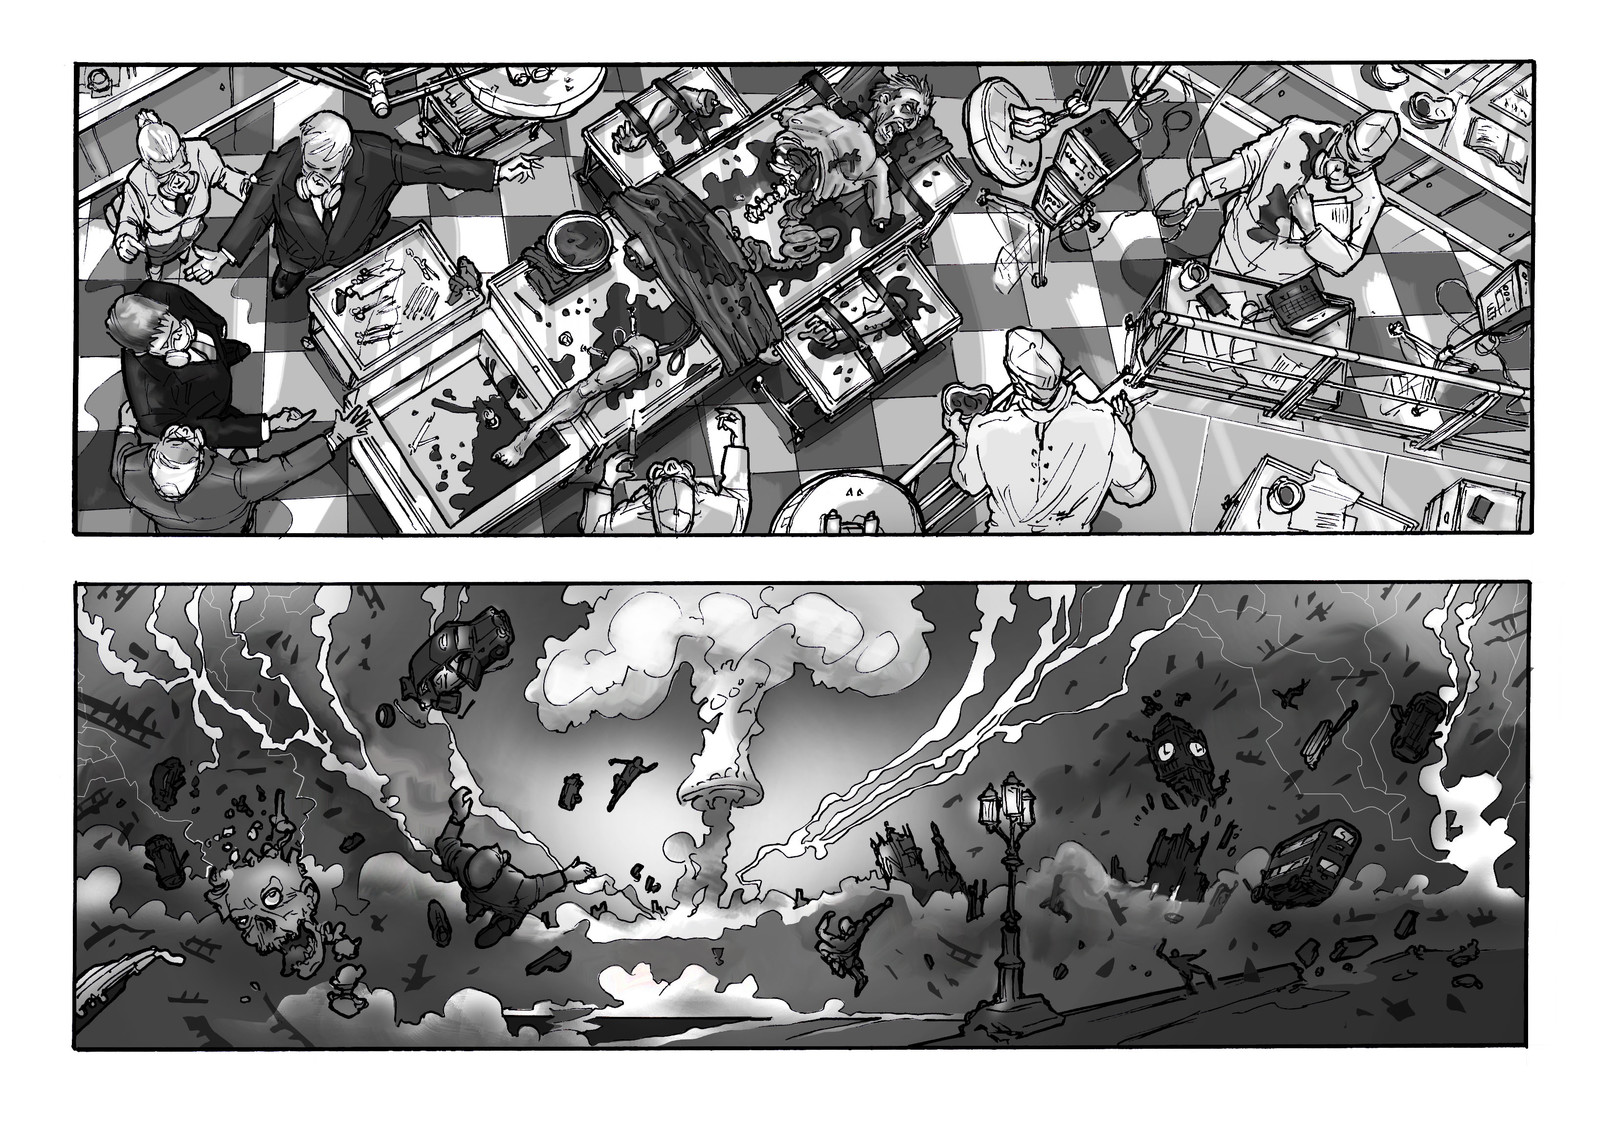 Panels from YAWYE/ from the comics anthology "Tragic Tales of Horrere"